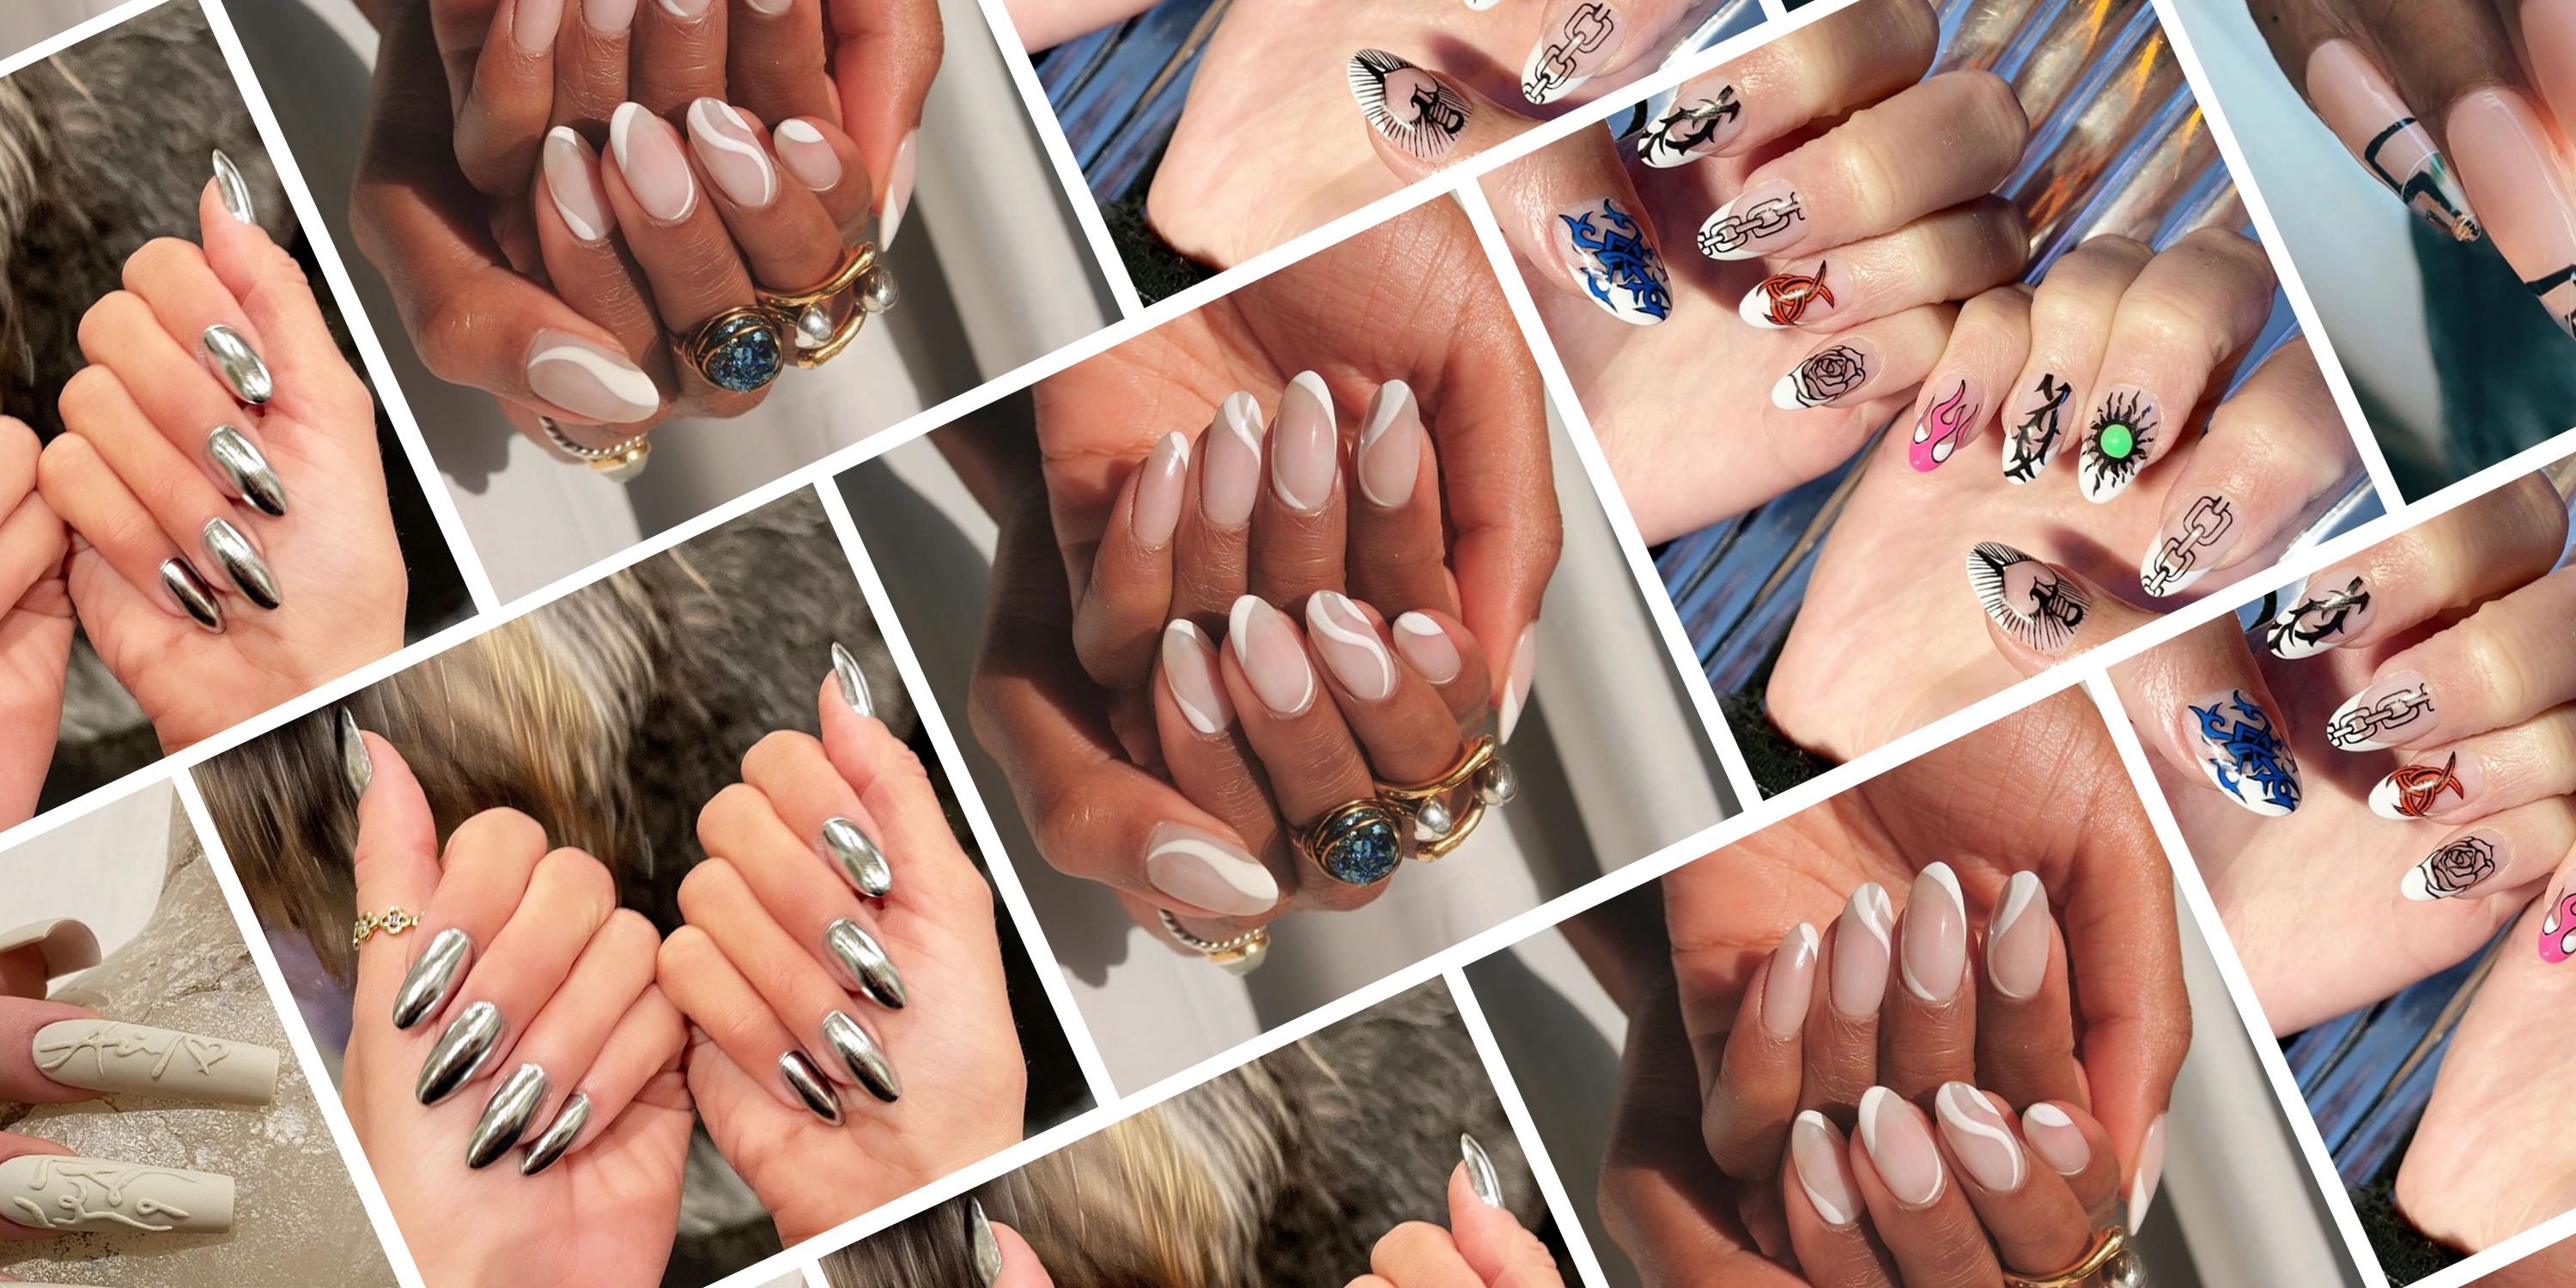 5. 2021 Nail Art Trends - Gallery and Inspiration - wide 3